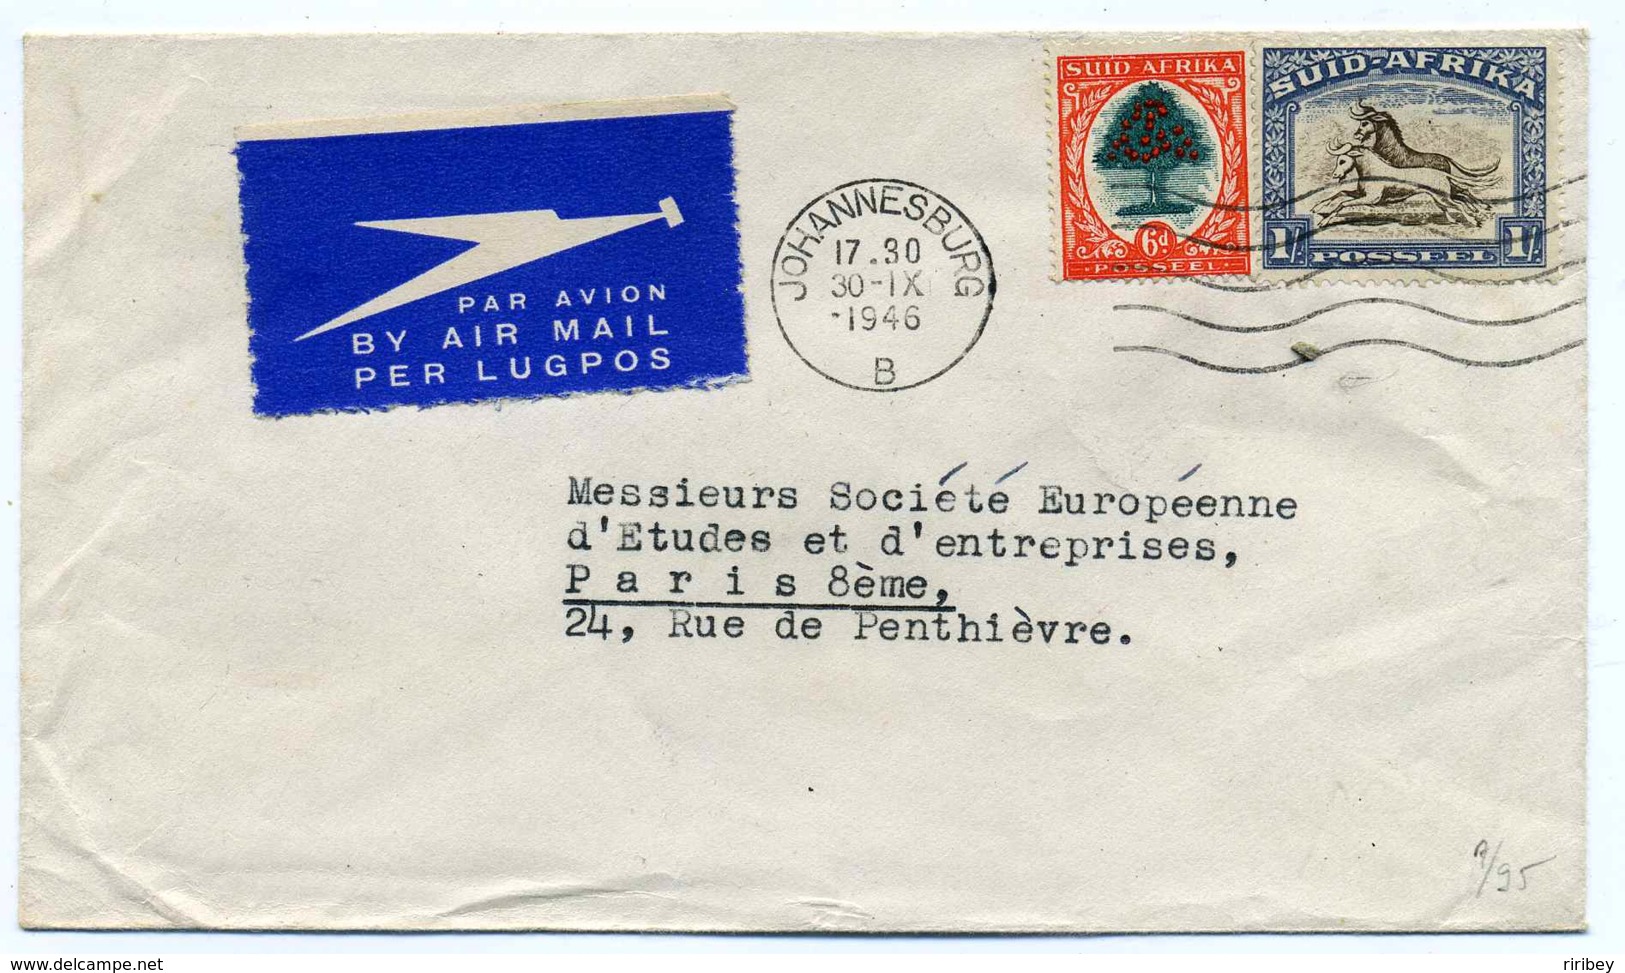 AIR MAIL COVER / JOHANNESBURG - SUID AFRICA / 1946 / To France - Poste Aérienne